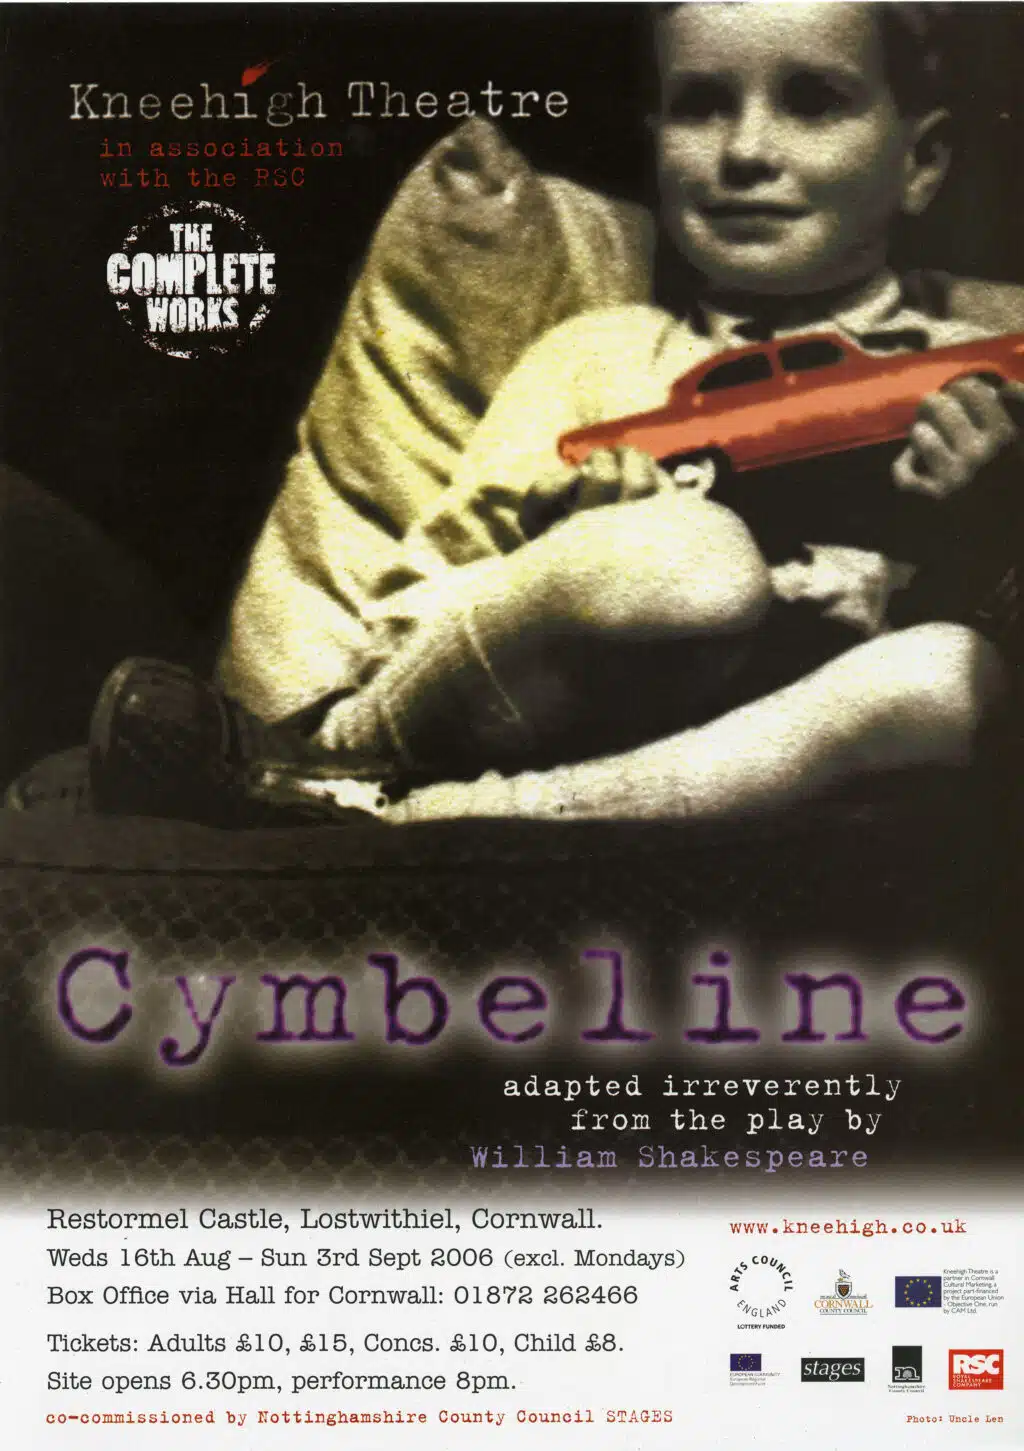 This image is a poster for Kneehigh's performance of Cymbeline at Restormel Castle running from Wednesday 16th August to Sunday 3rd September 2006. The image depicts a faded photo of a young boy holding a bright red toy car in the mid to top left of the image. The top right features the Kneehigh Theatre logo in a black typewriter font and the words 'in association with the RSC' in smaller red font. The bottom half of the poster features the title 'Cymbeline' in a glowing purple font. Underneath written in small white text reads 'adapted irreverently from the play by William Shakespeare'. Below this is black text on a white background with information about the dates, location and price of performances.